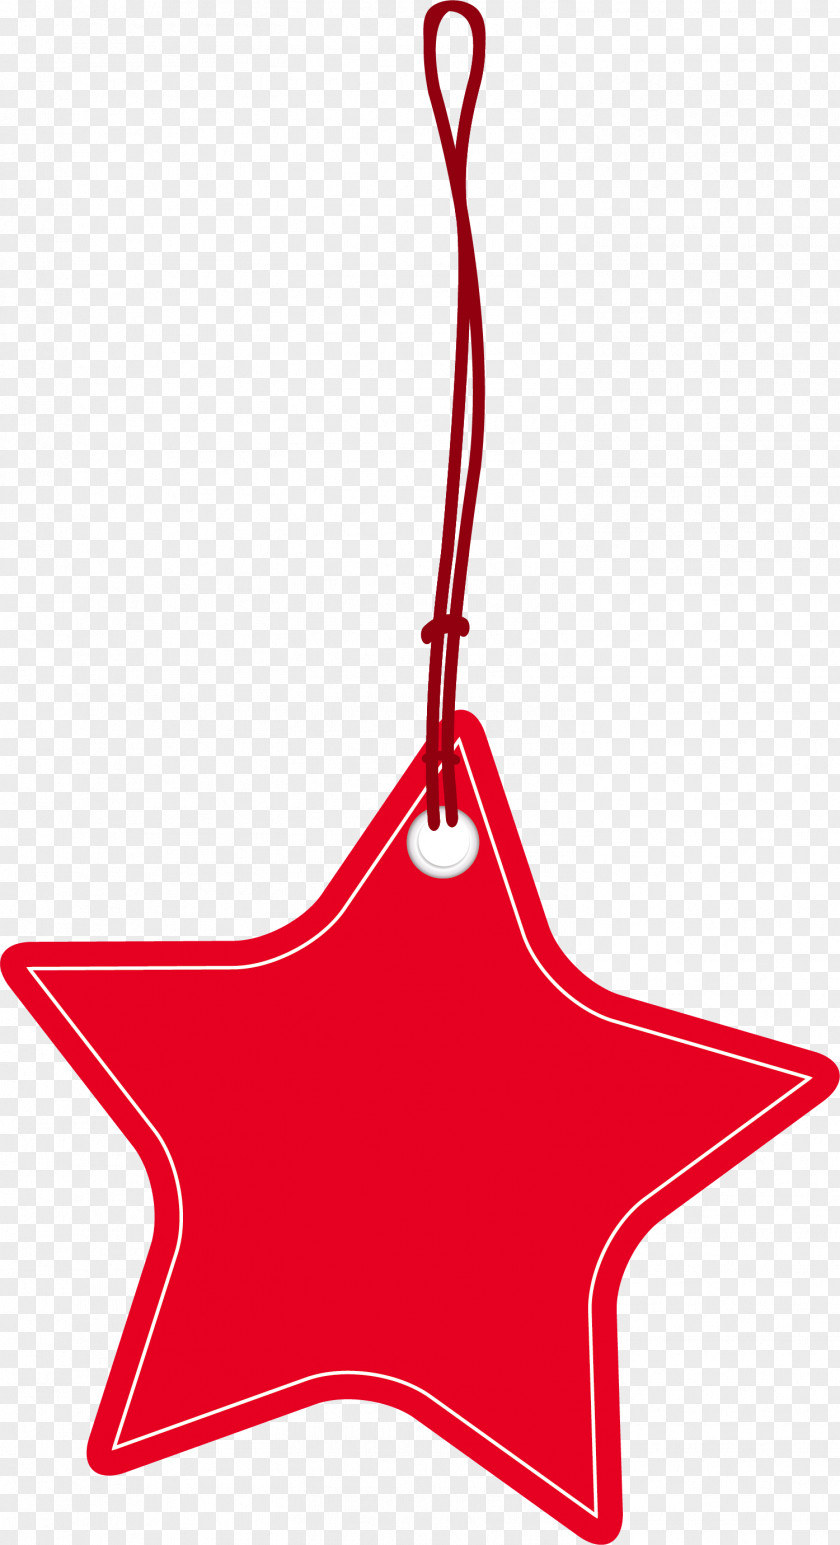 Simple Red Star Clip Art PNG